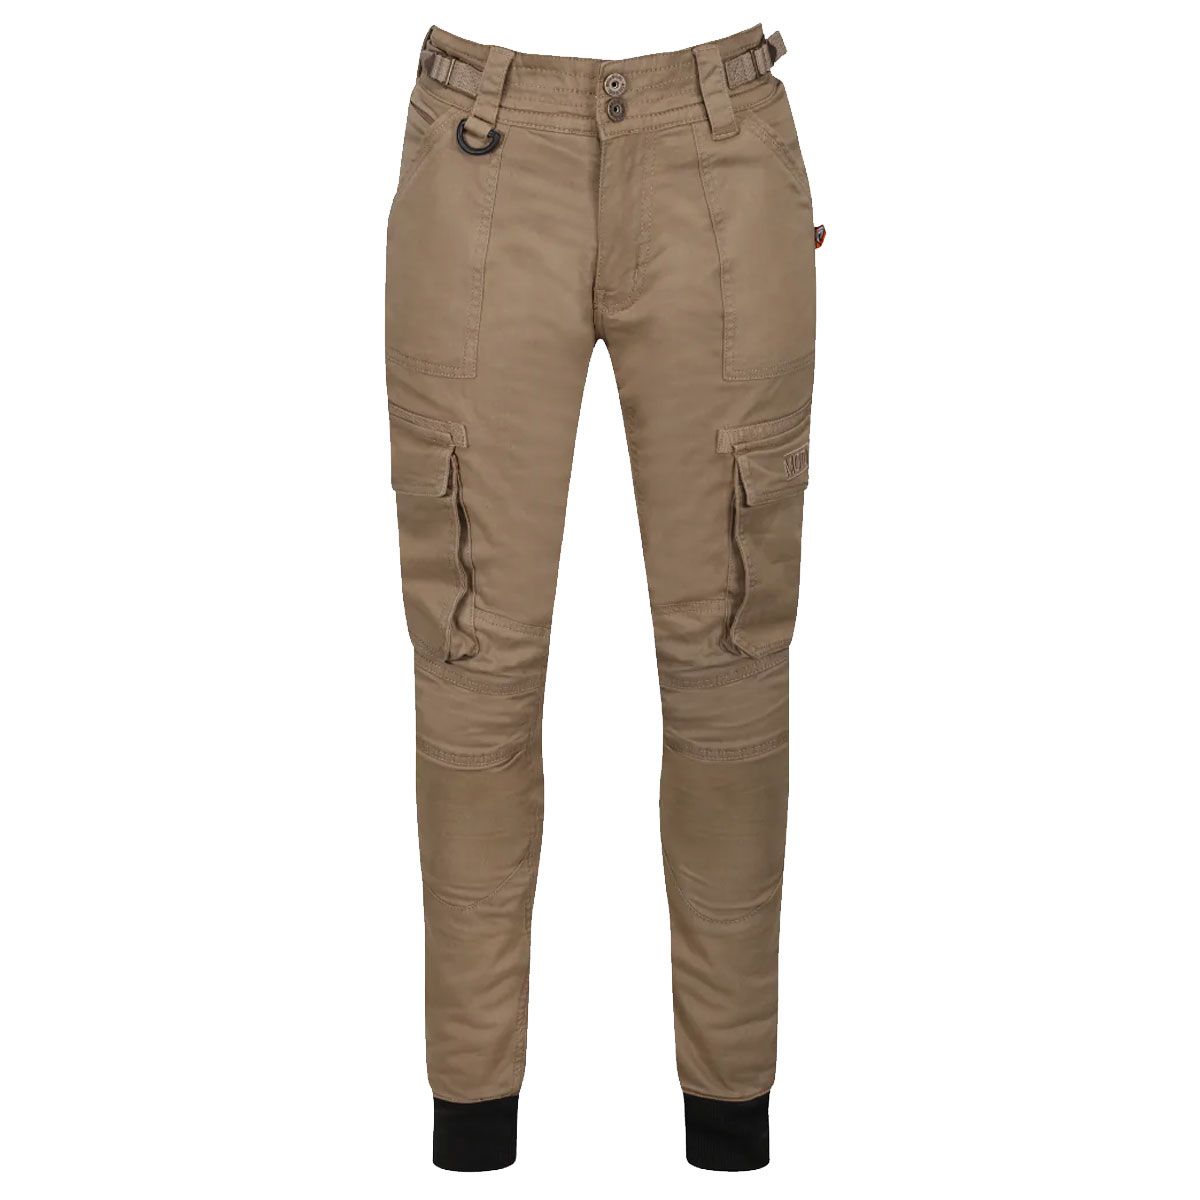 Motorcycle Trousers - Motorcycle Clothing